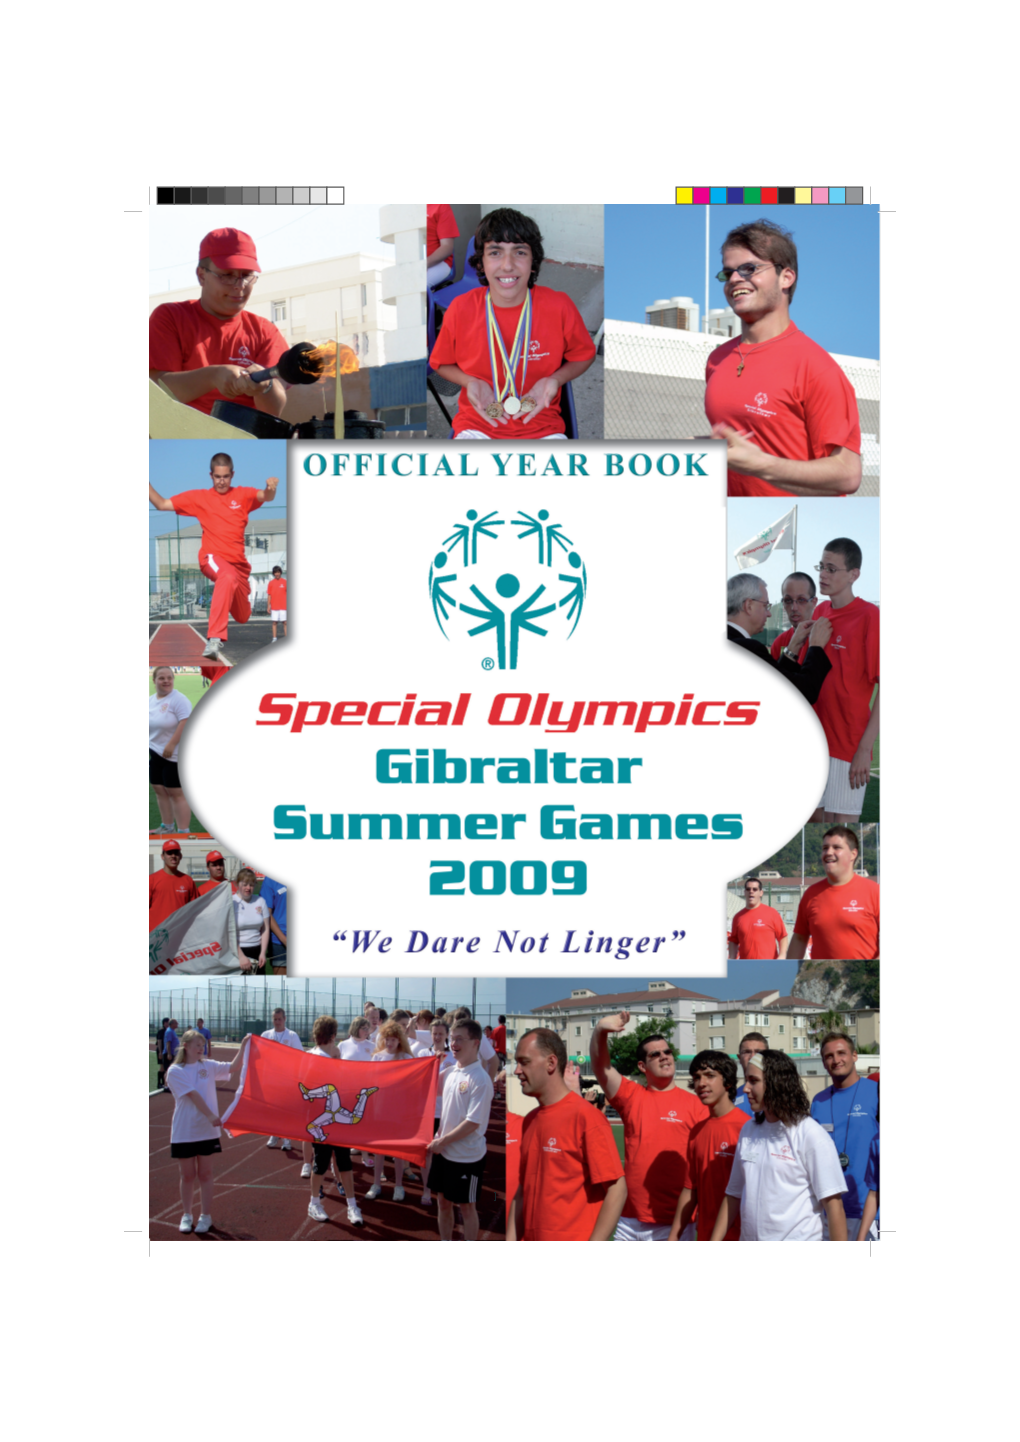 Special Olympics Gibraltar Has Dedicated and Loyal Coaches Who, Over the Past Twenty Four